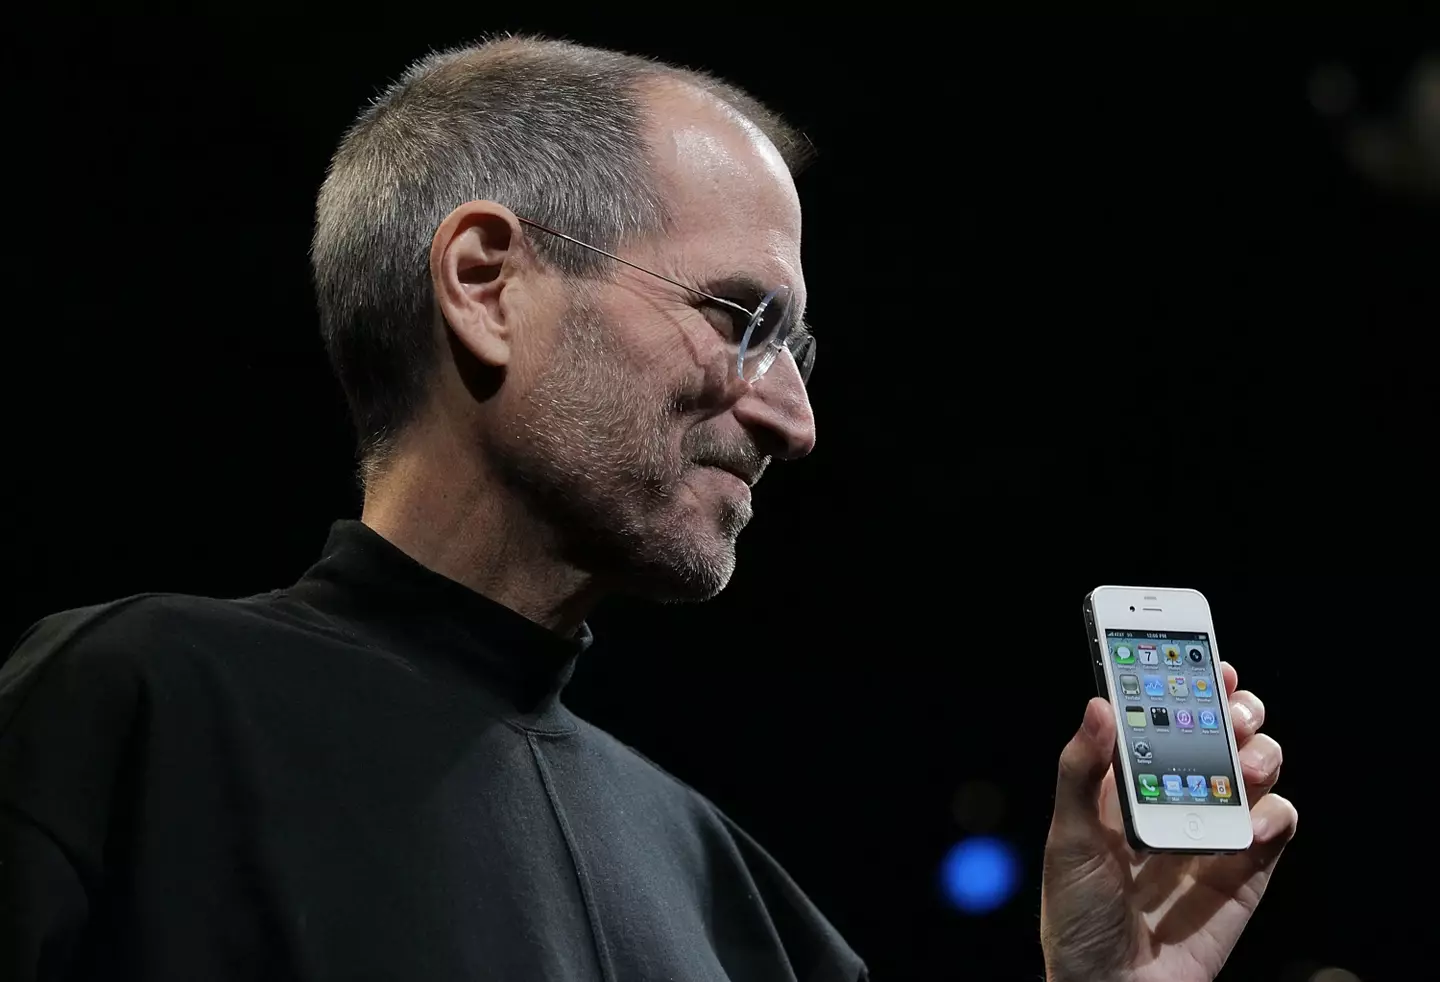 Jobs must've been onto something - he did give us the iPhone, after all.